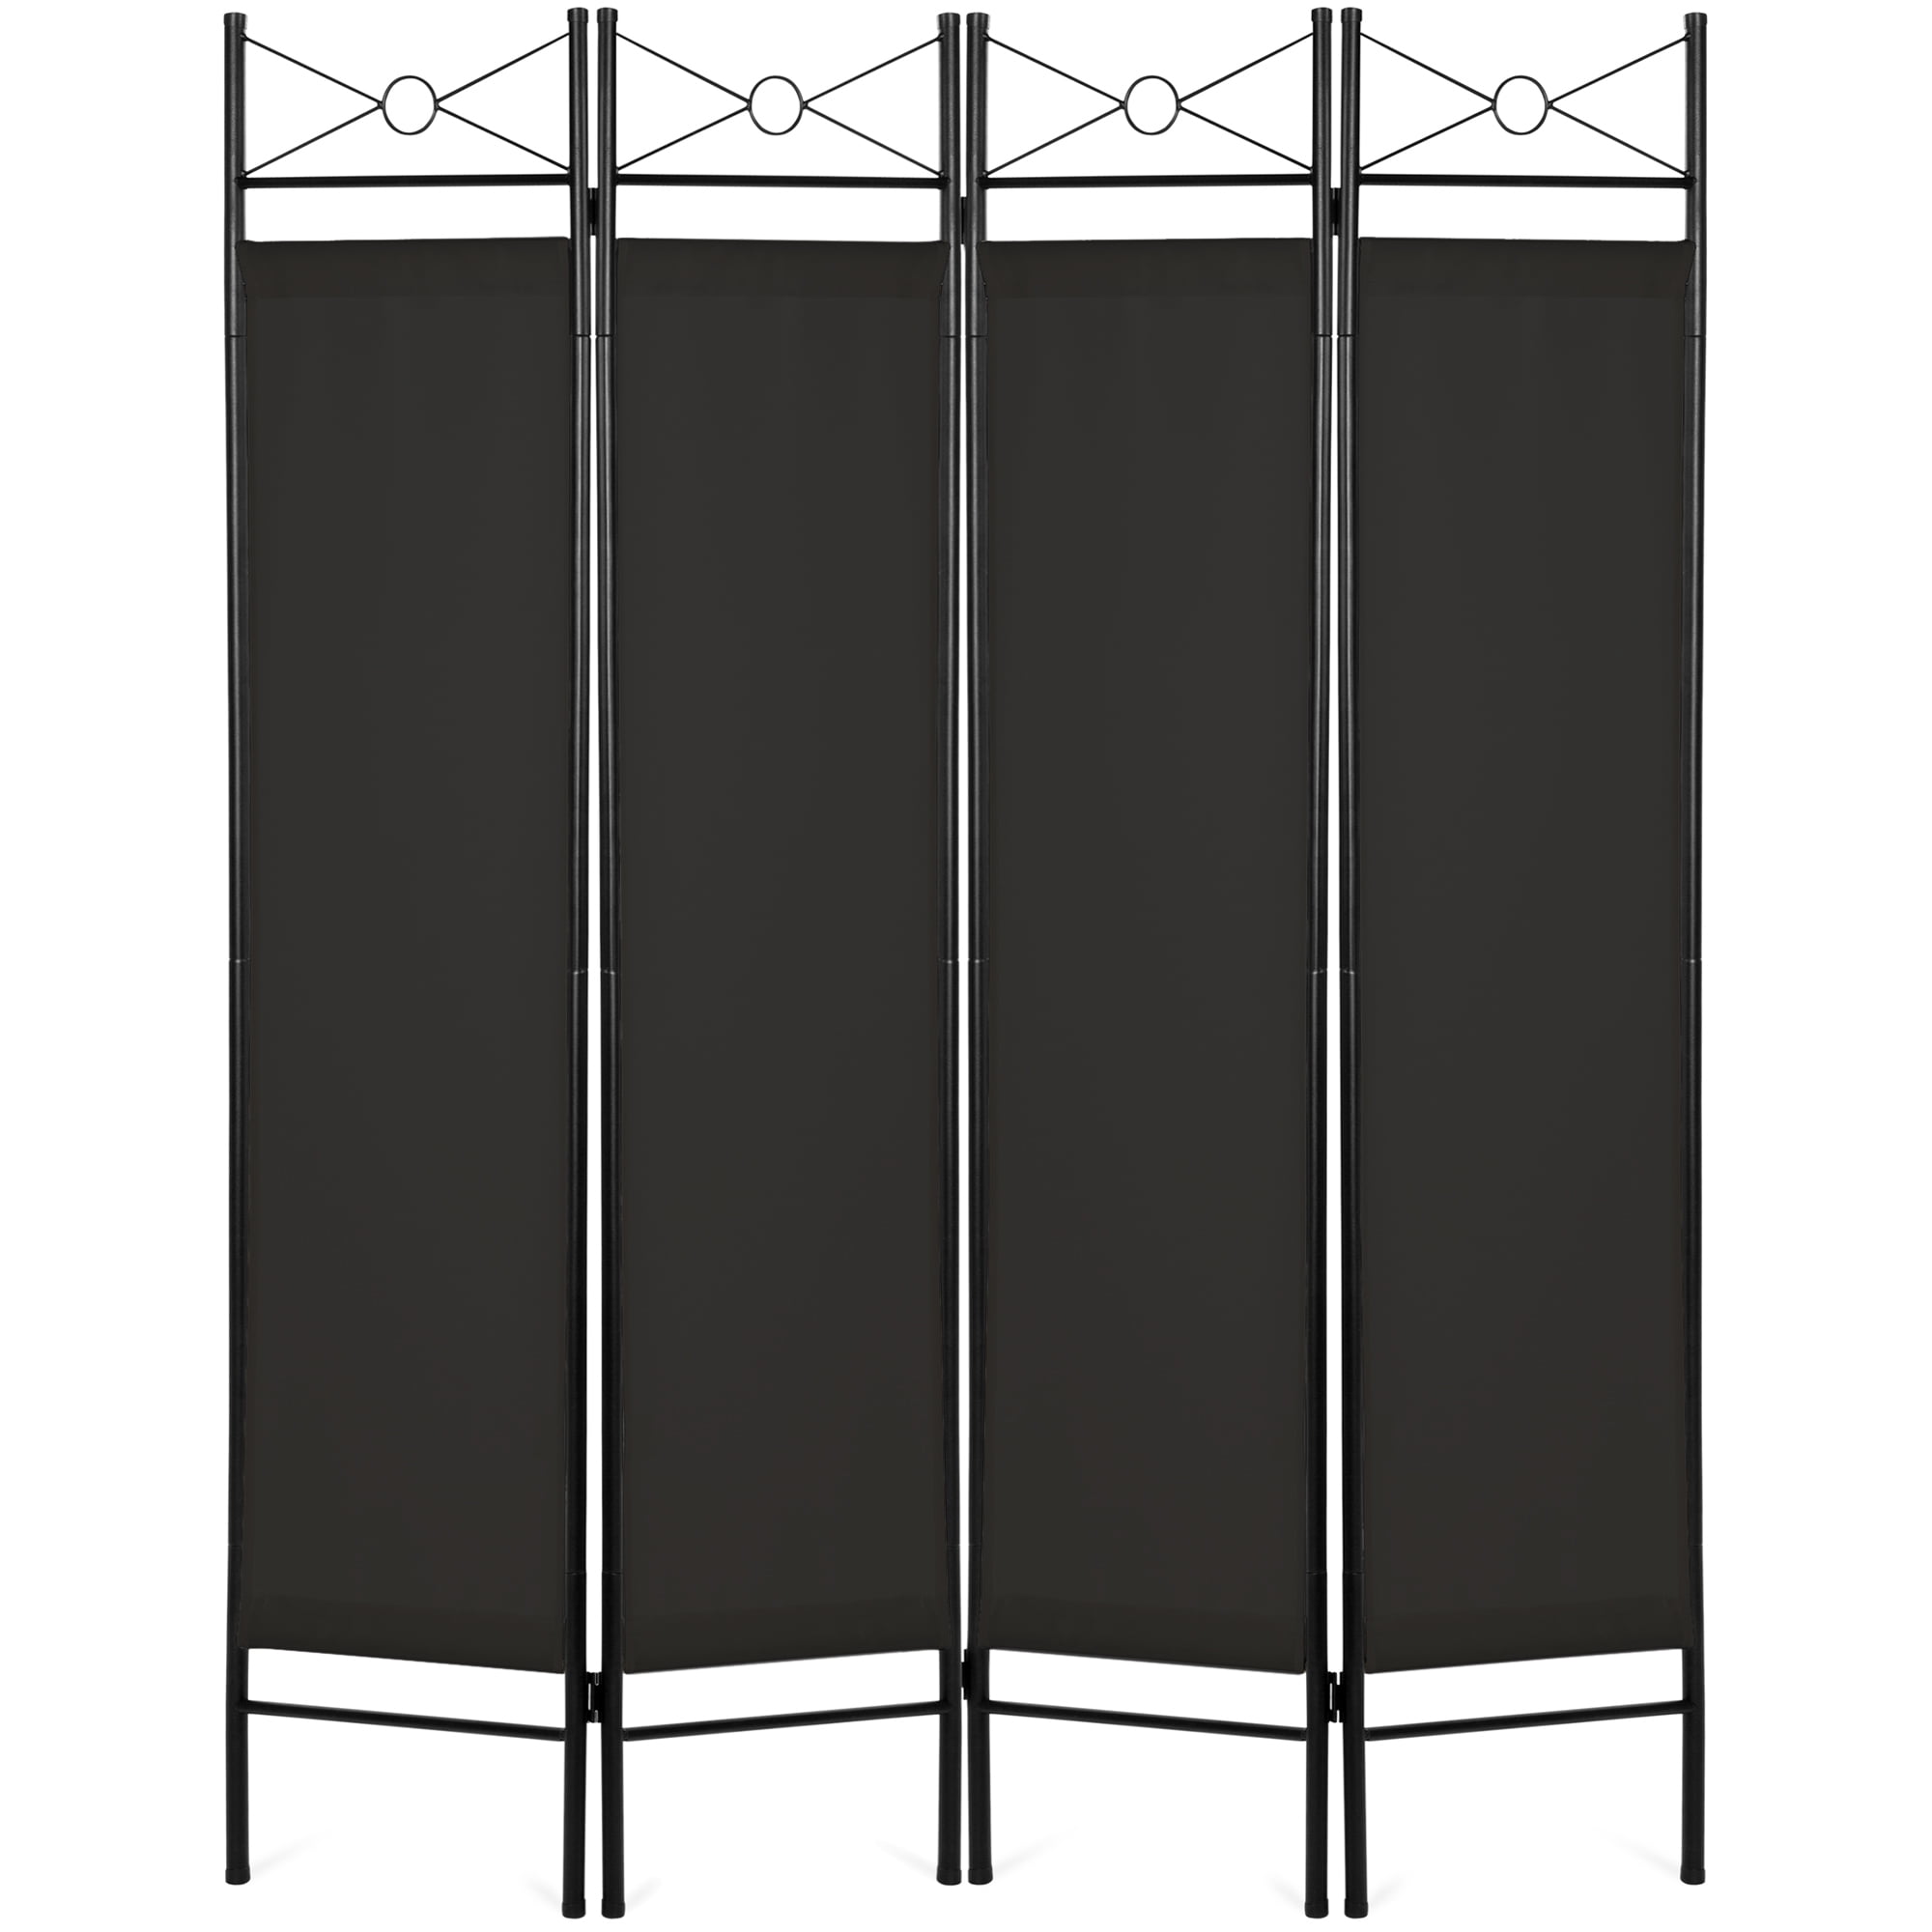 Best Choice Products 6ft 4-Panel Folding Privacy Screen Room ...